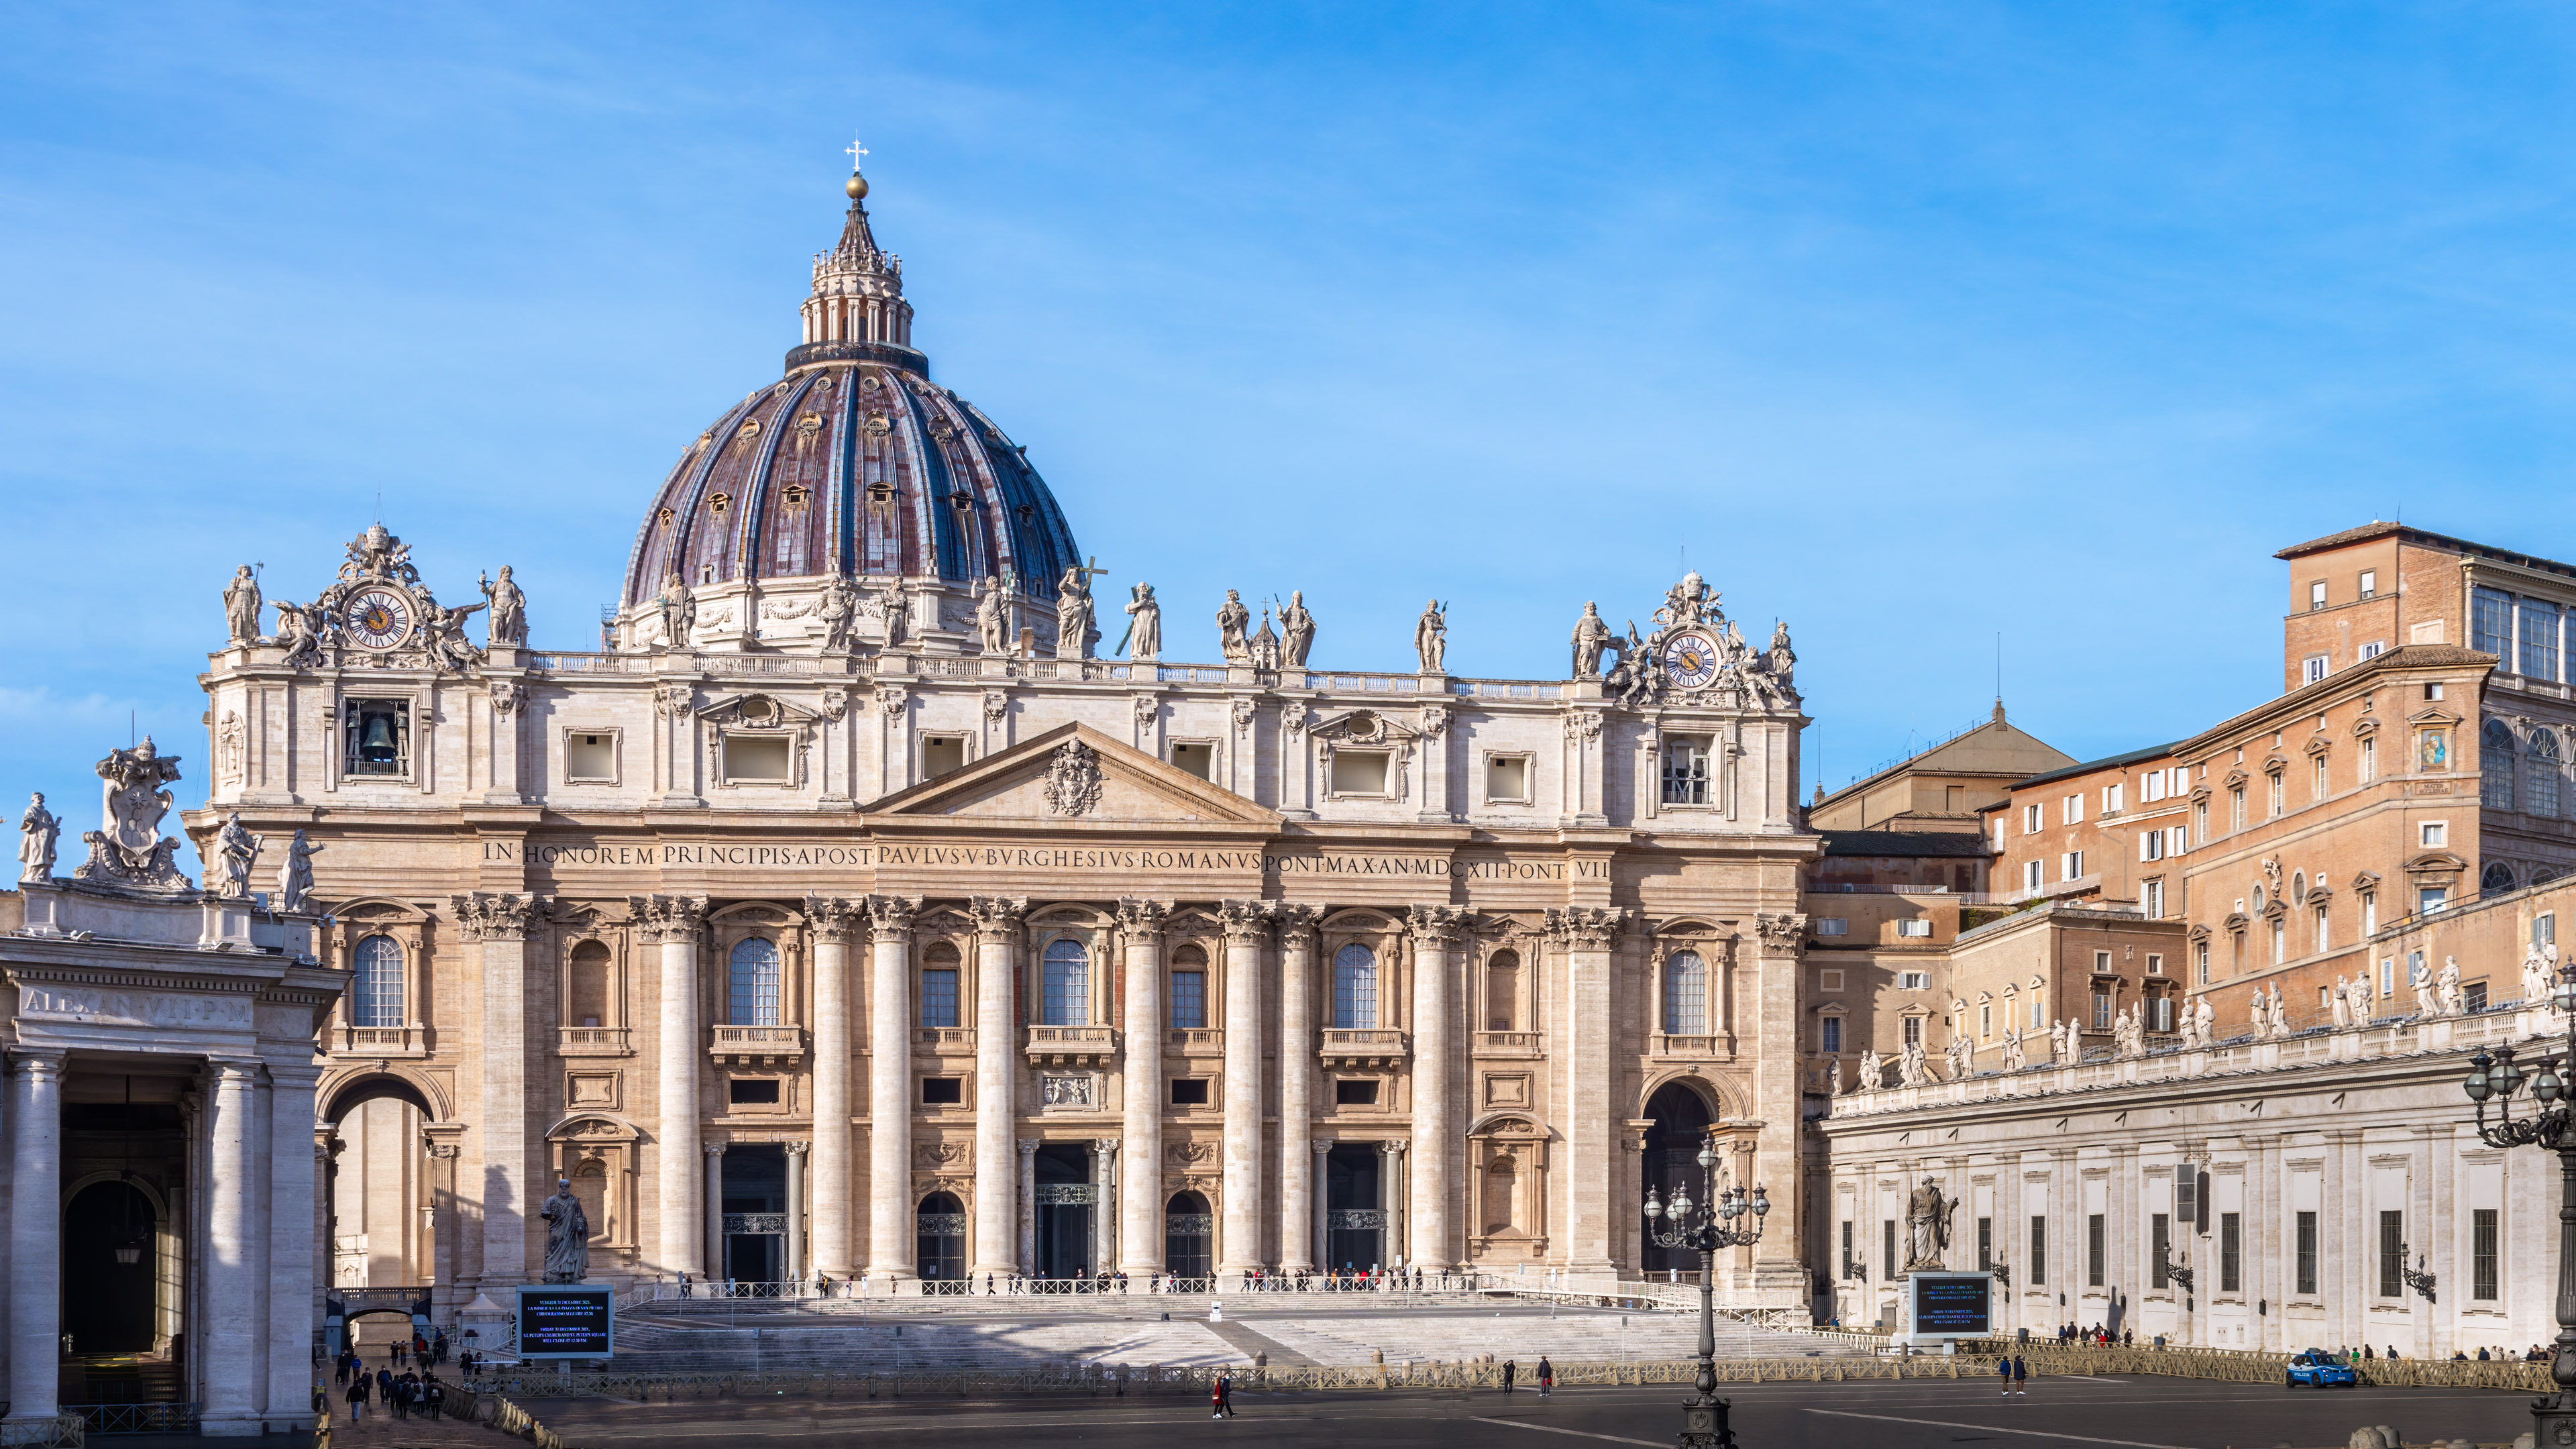 Transform your desktop into a cultural haven with the city wallpaper for desktop featuring the timeless allure of Vatican City.